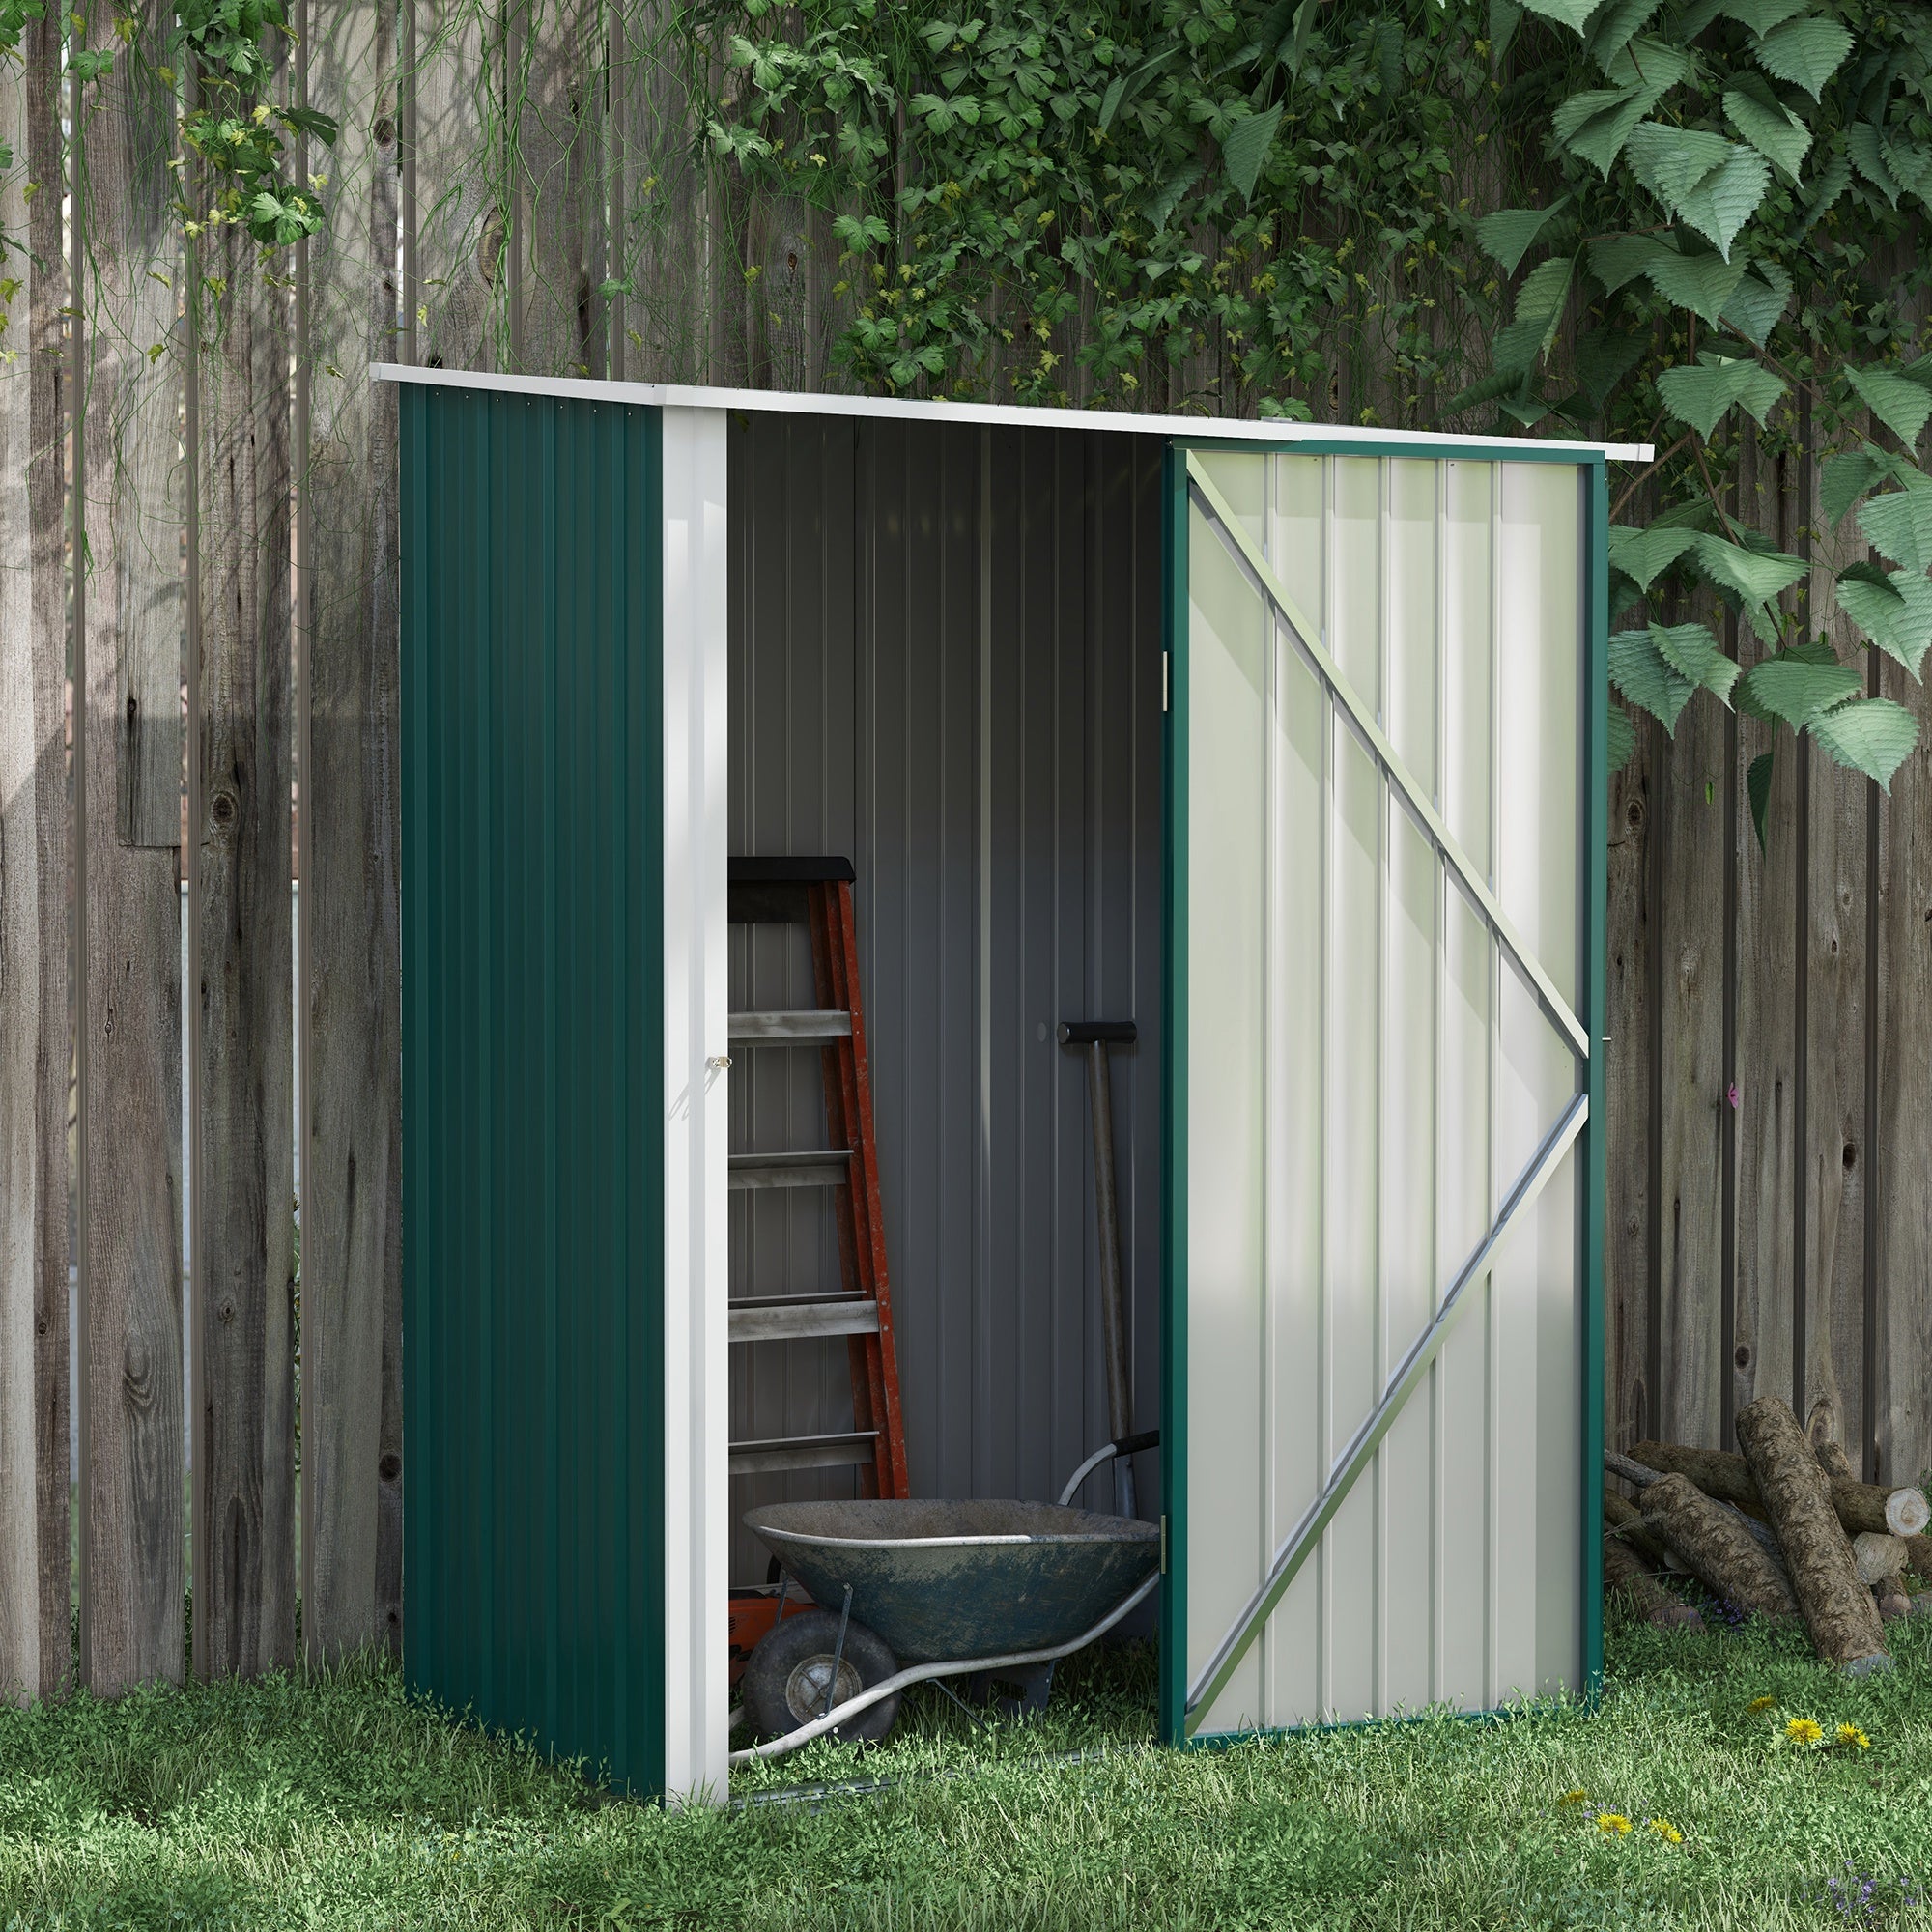 Outsunny Outdoor Storage Shed, Garden Metal Storage Shed w/ Single Door for Garden, Patio, Lawn, 5.3ft x 3.1ft, Green